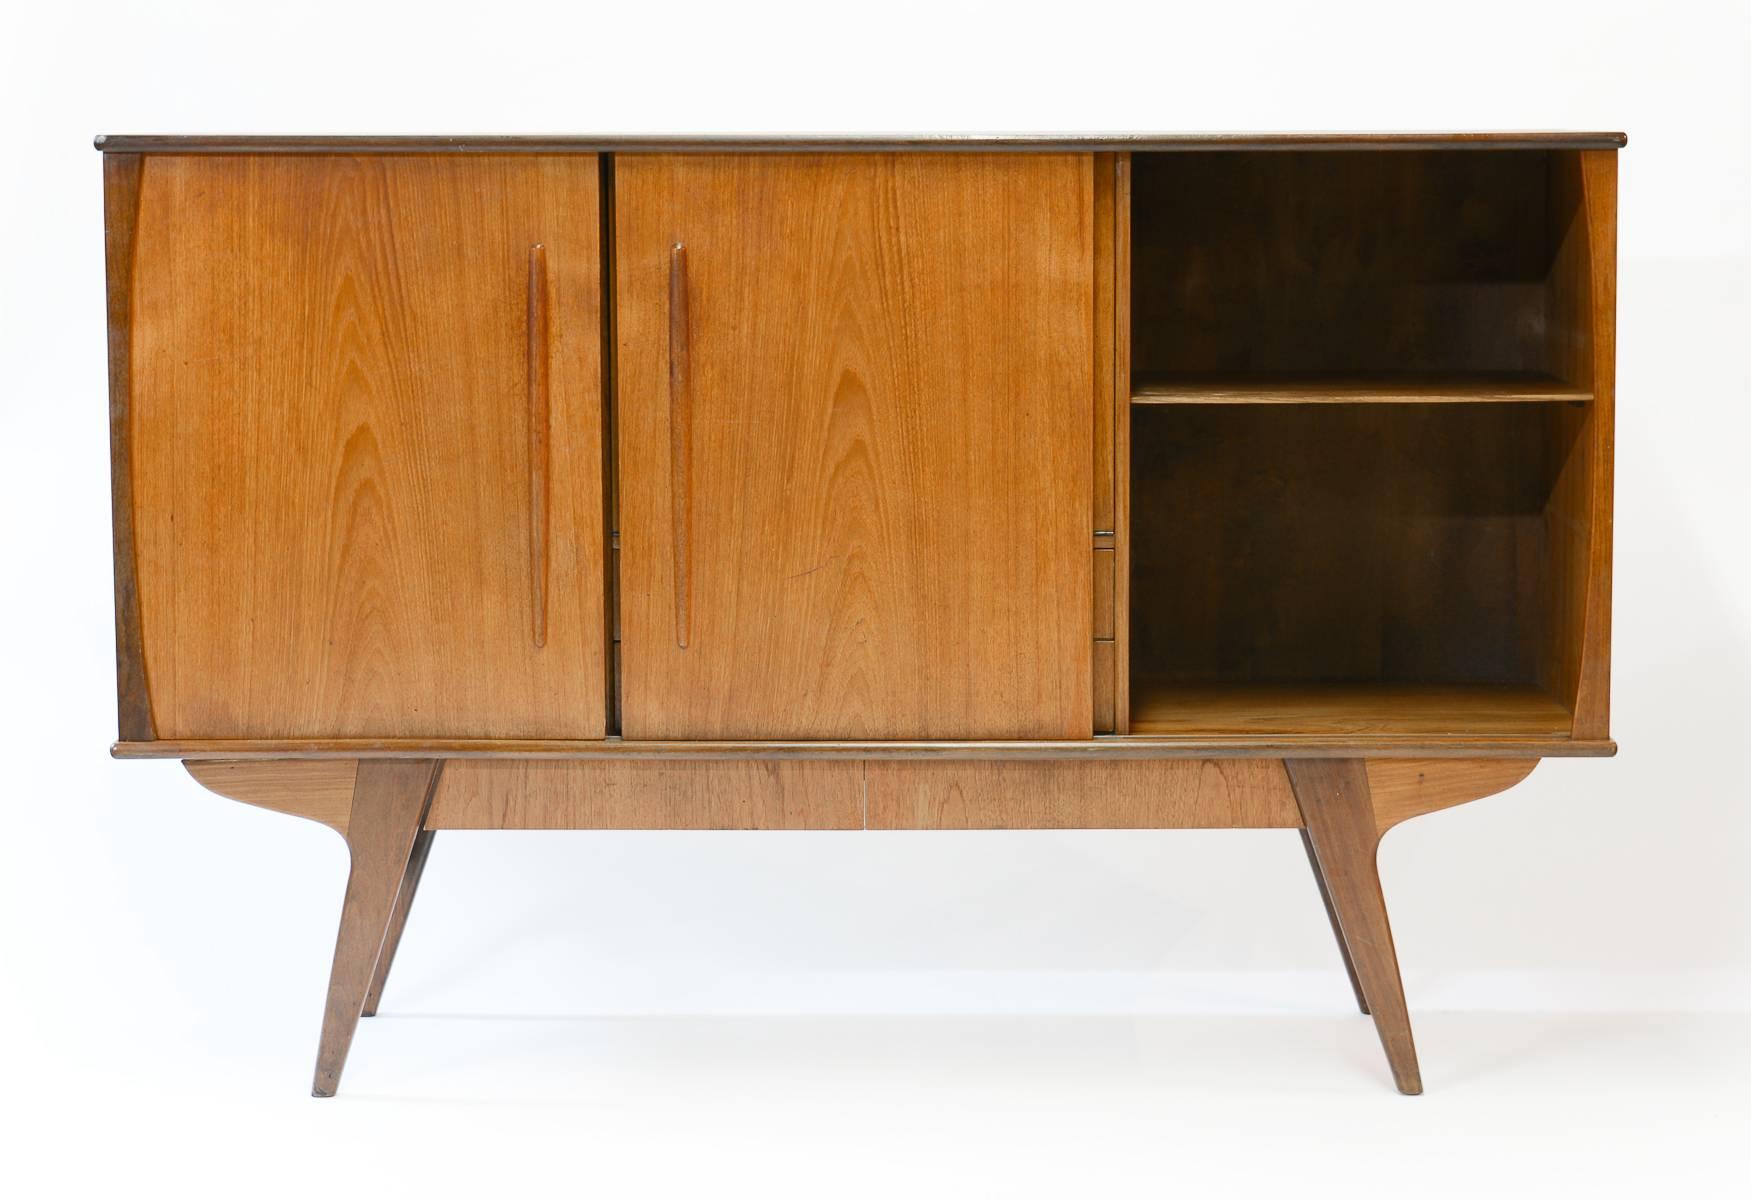 An elegant Danish teak sideboard with angled legs, hidden bottom drawers and drop-door bar perfect for entertaining. Beautifully streamlined and refined in design for a fabulous mid-century look in any home or office. This sideboard features left